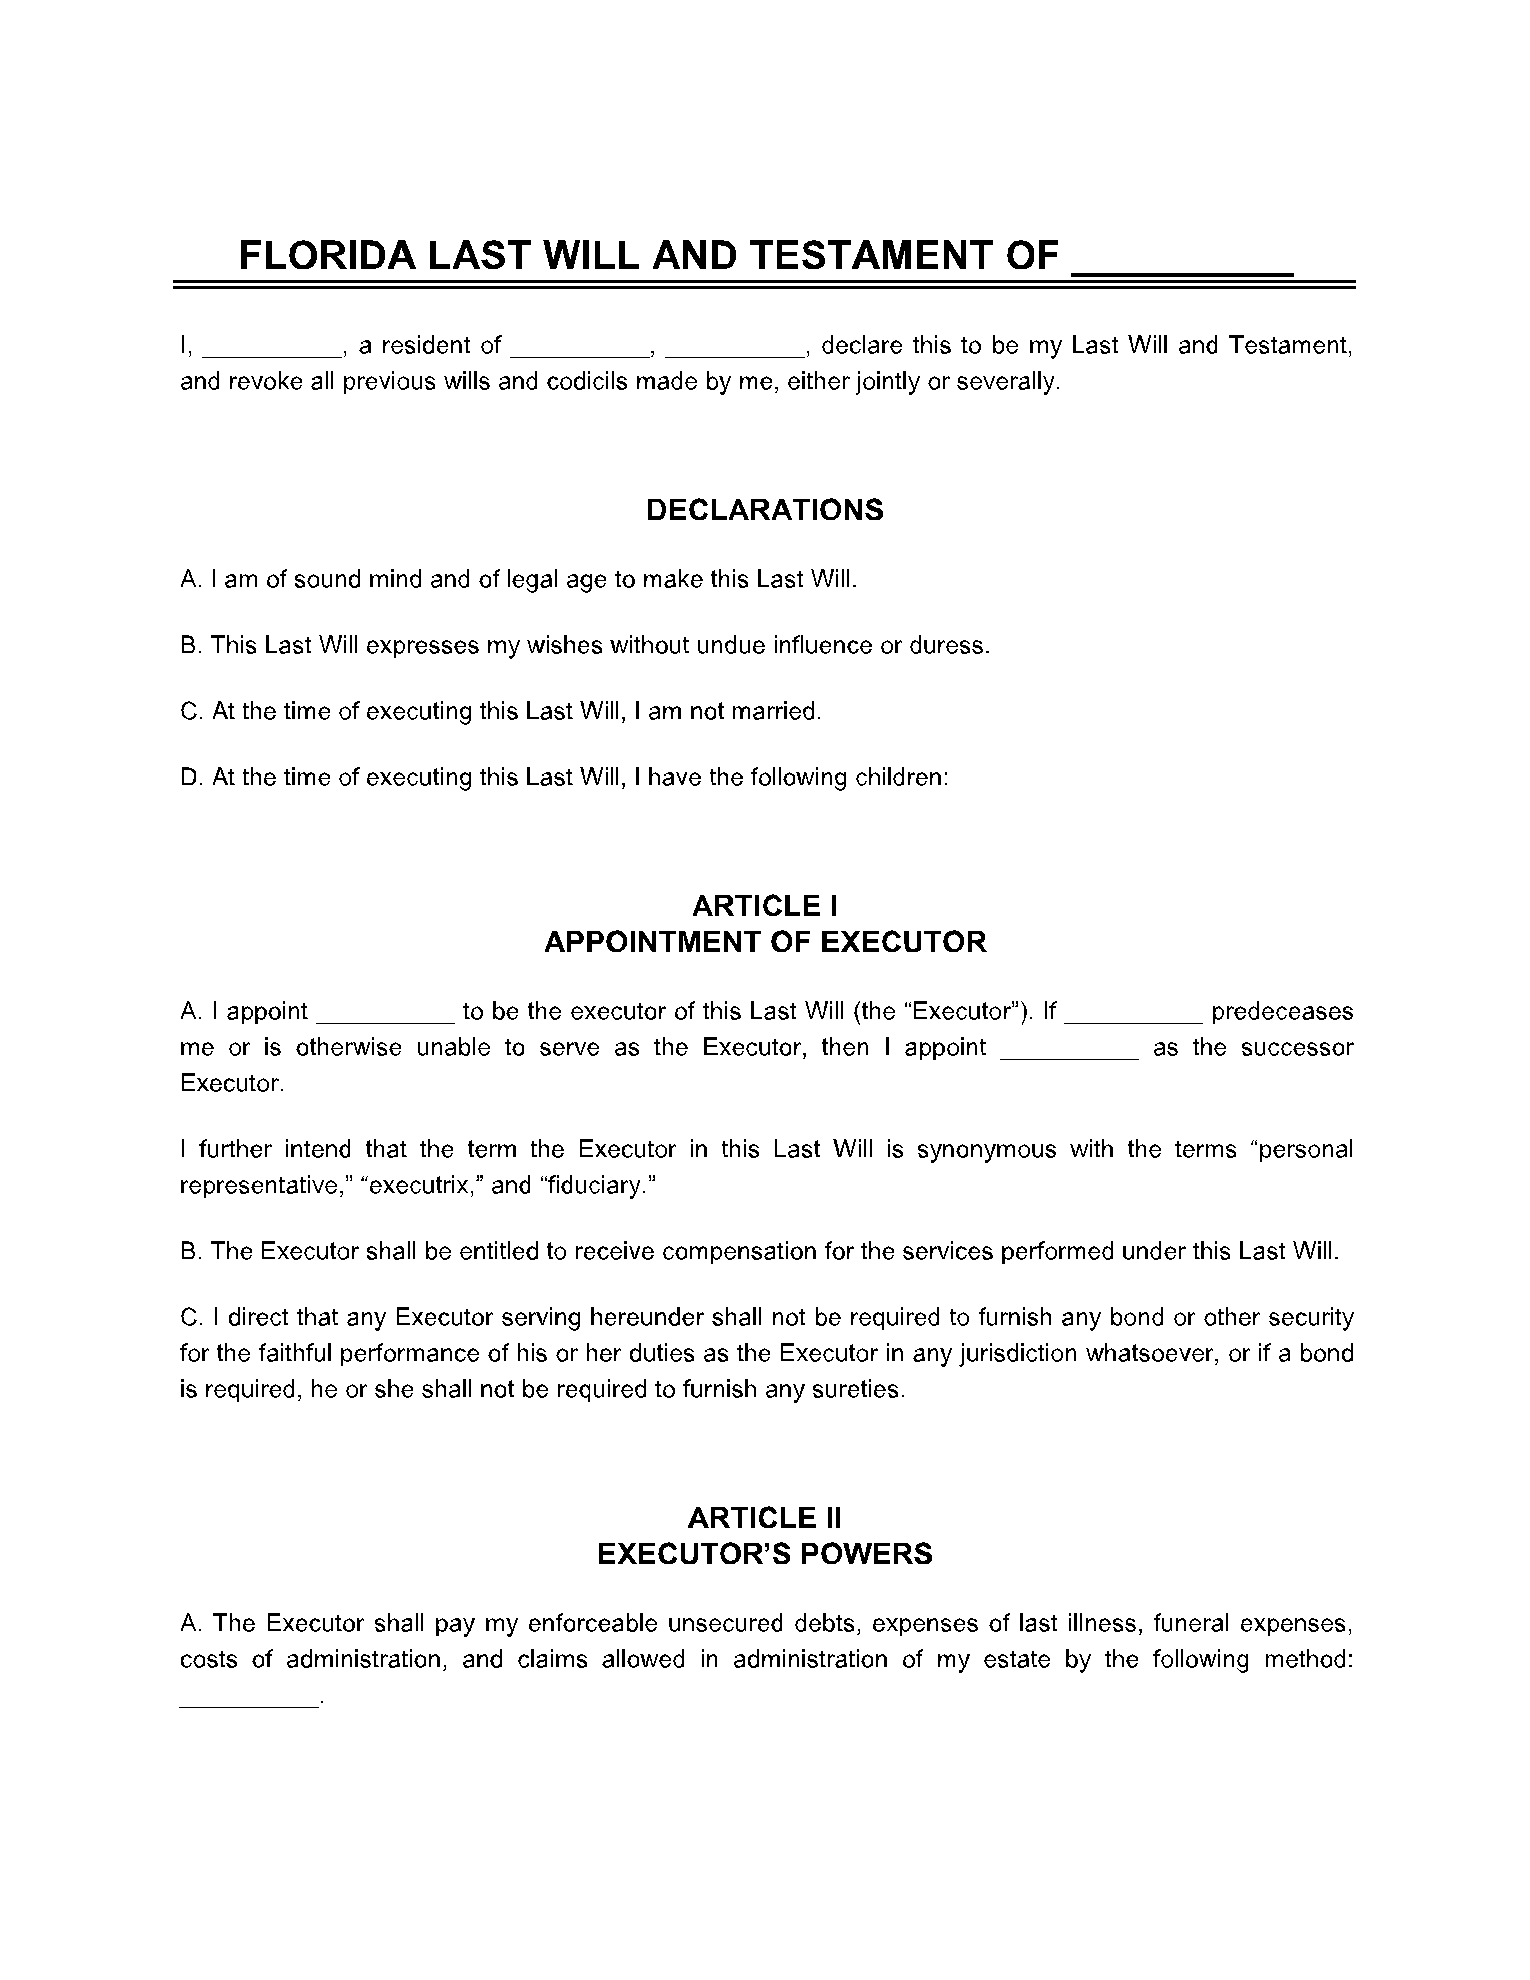 Last Will and Testament Florida